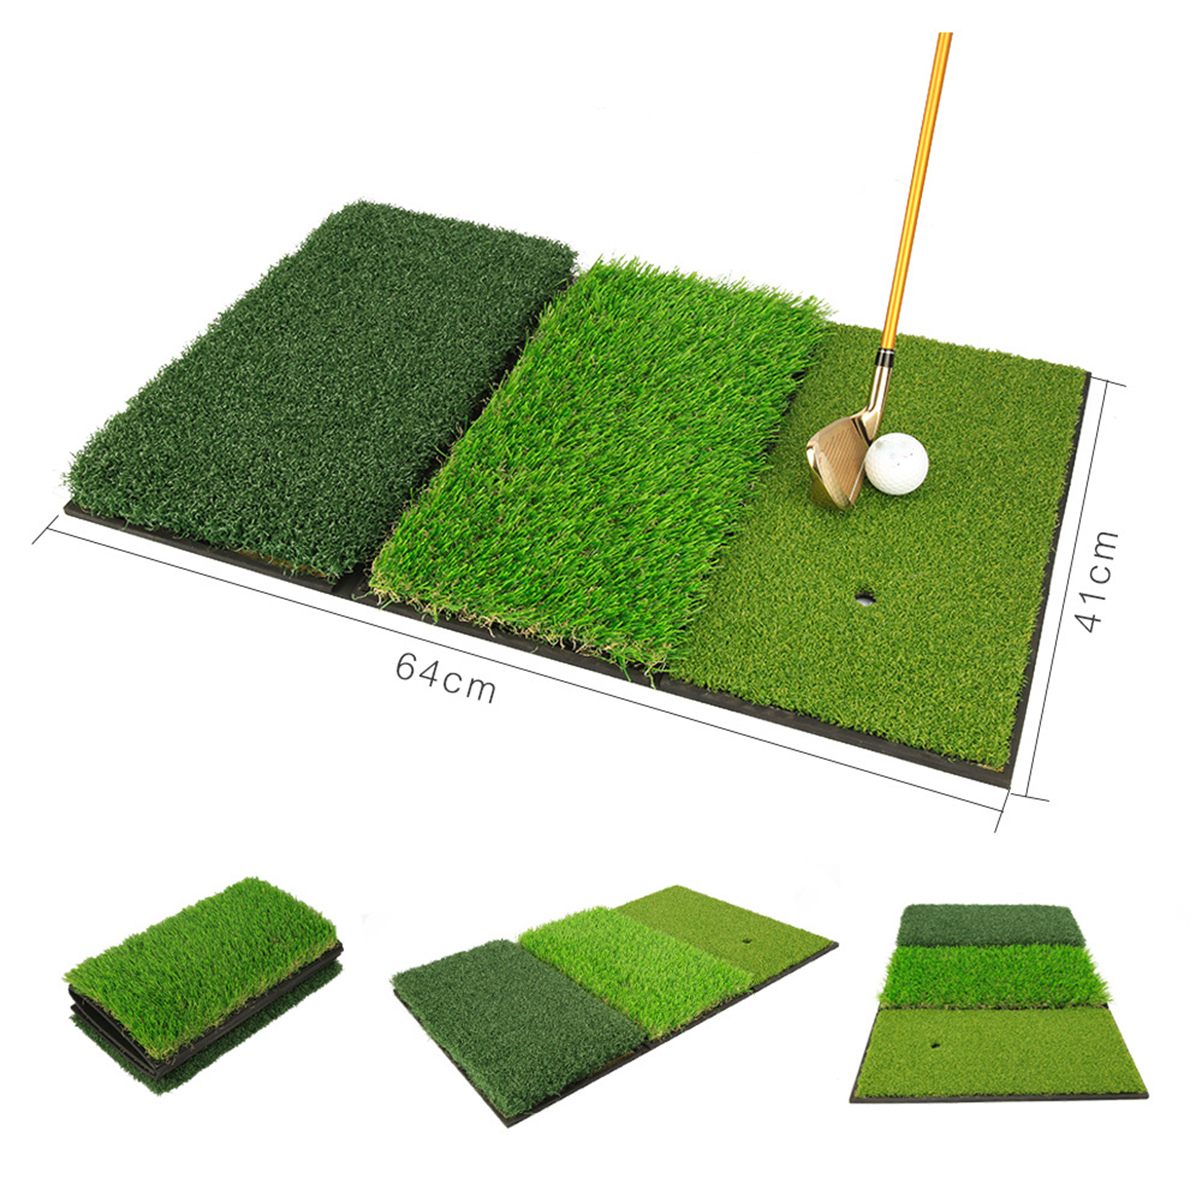 6441CM-3-in-1-Golf-Hitting-Mat-Multi-Function-Tri-Turf-Golf-Practice-Training-for-Chipping-Practice--1759463-5